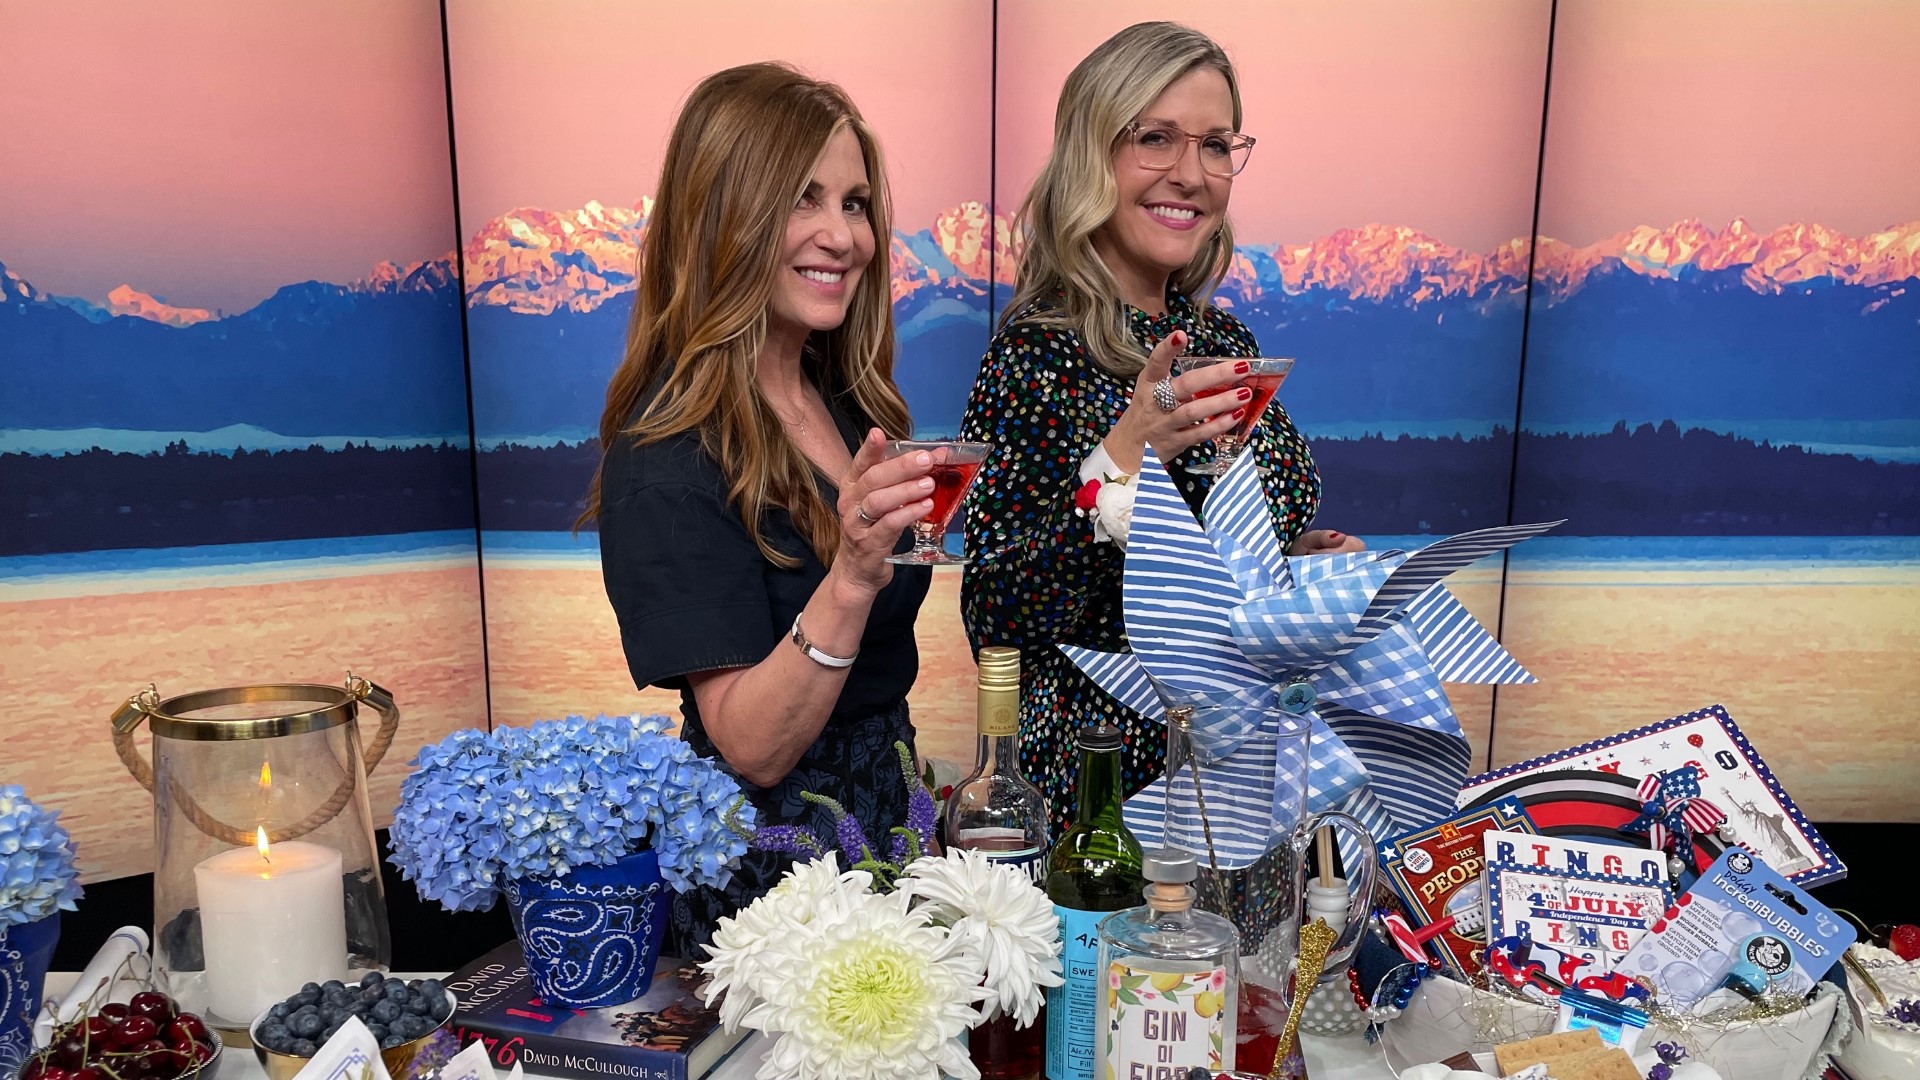 Festive décor, patriotic desserts and party games you’re guests will love. 425 Magazine’s Monica Hart throws a 4th of July party on New Day. #newdaynw